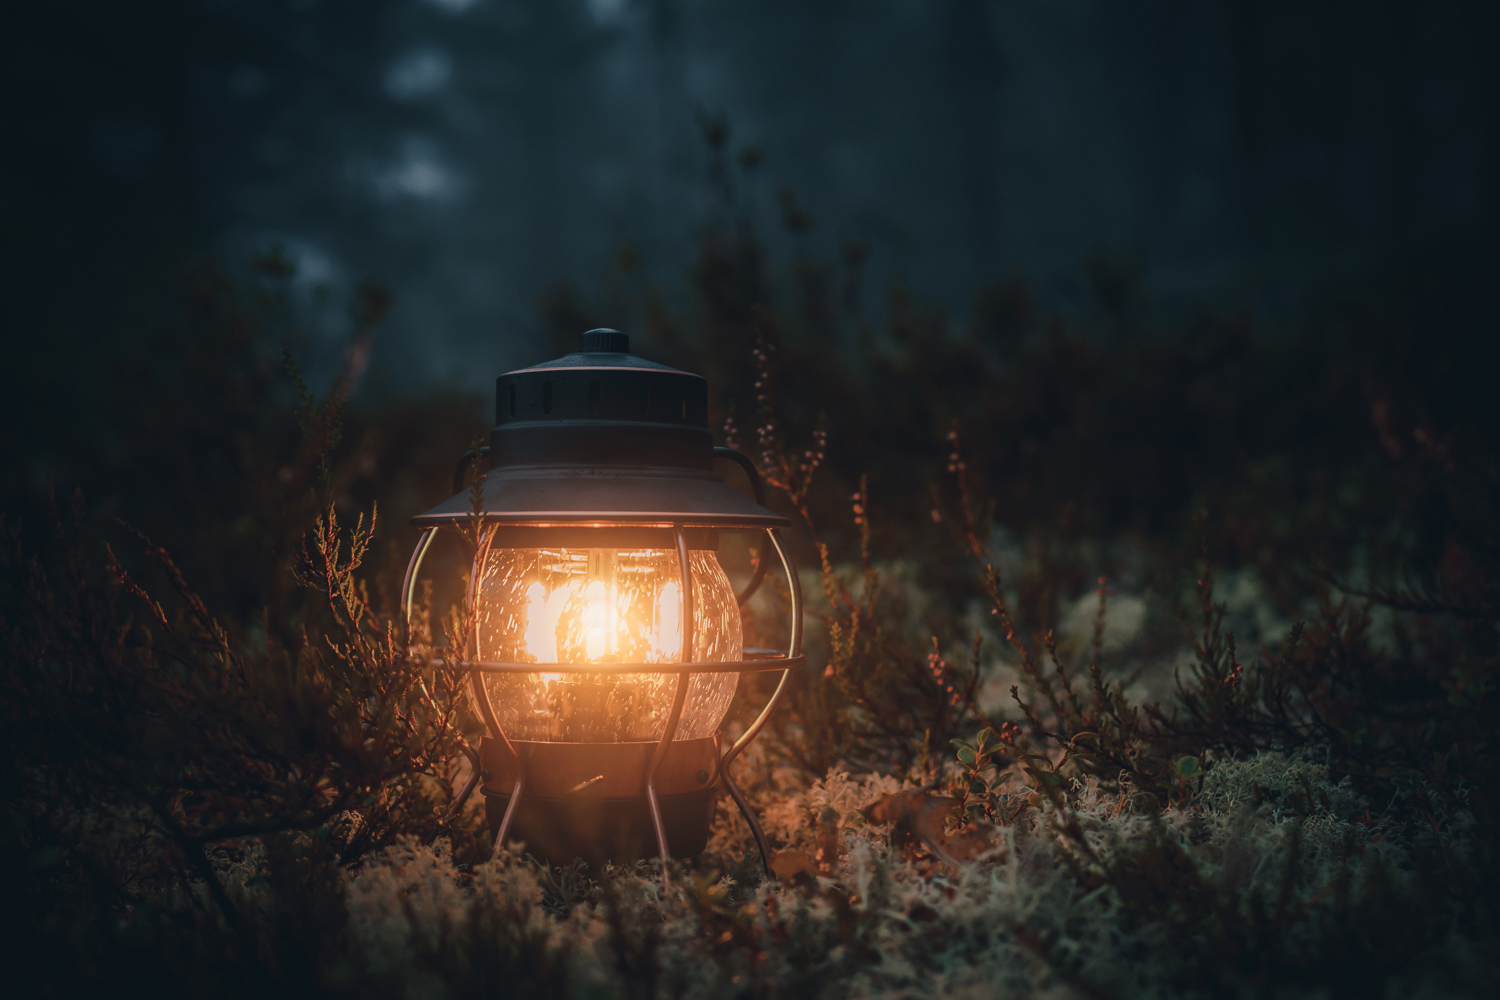 Lantern glowing in a misty evening forest